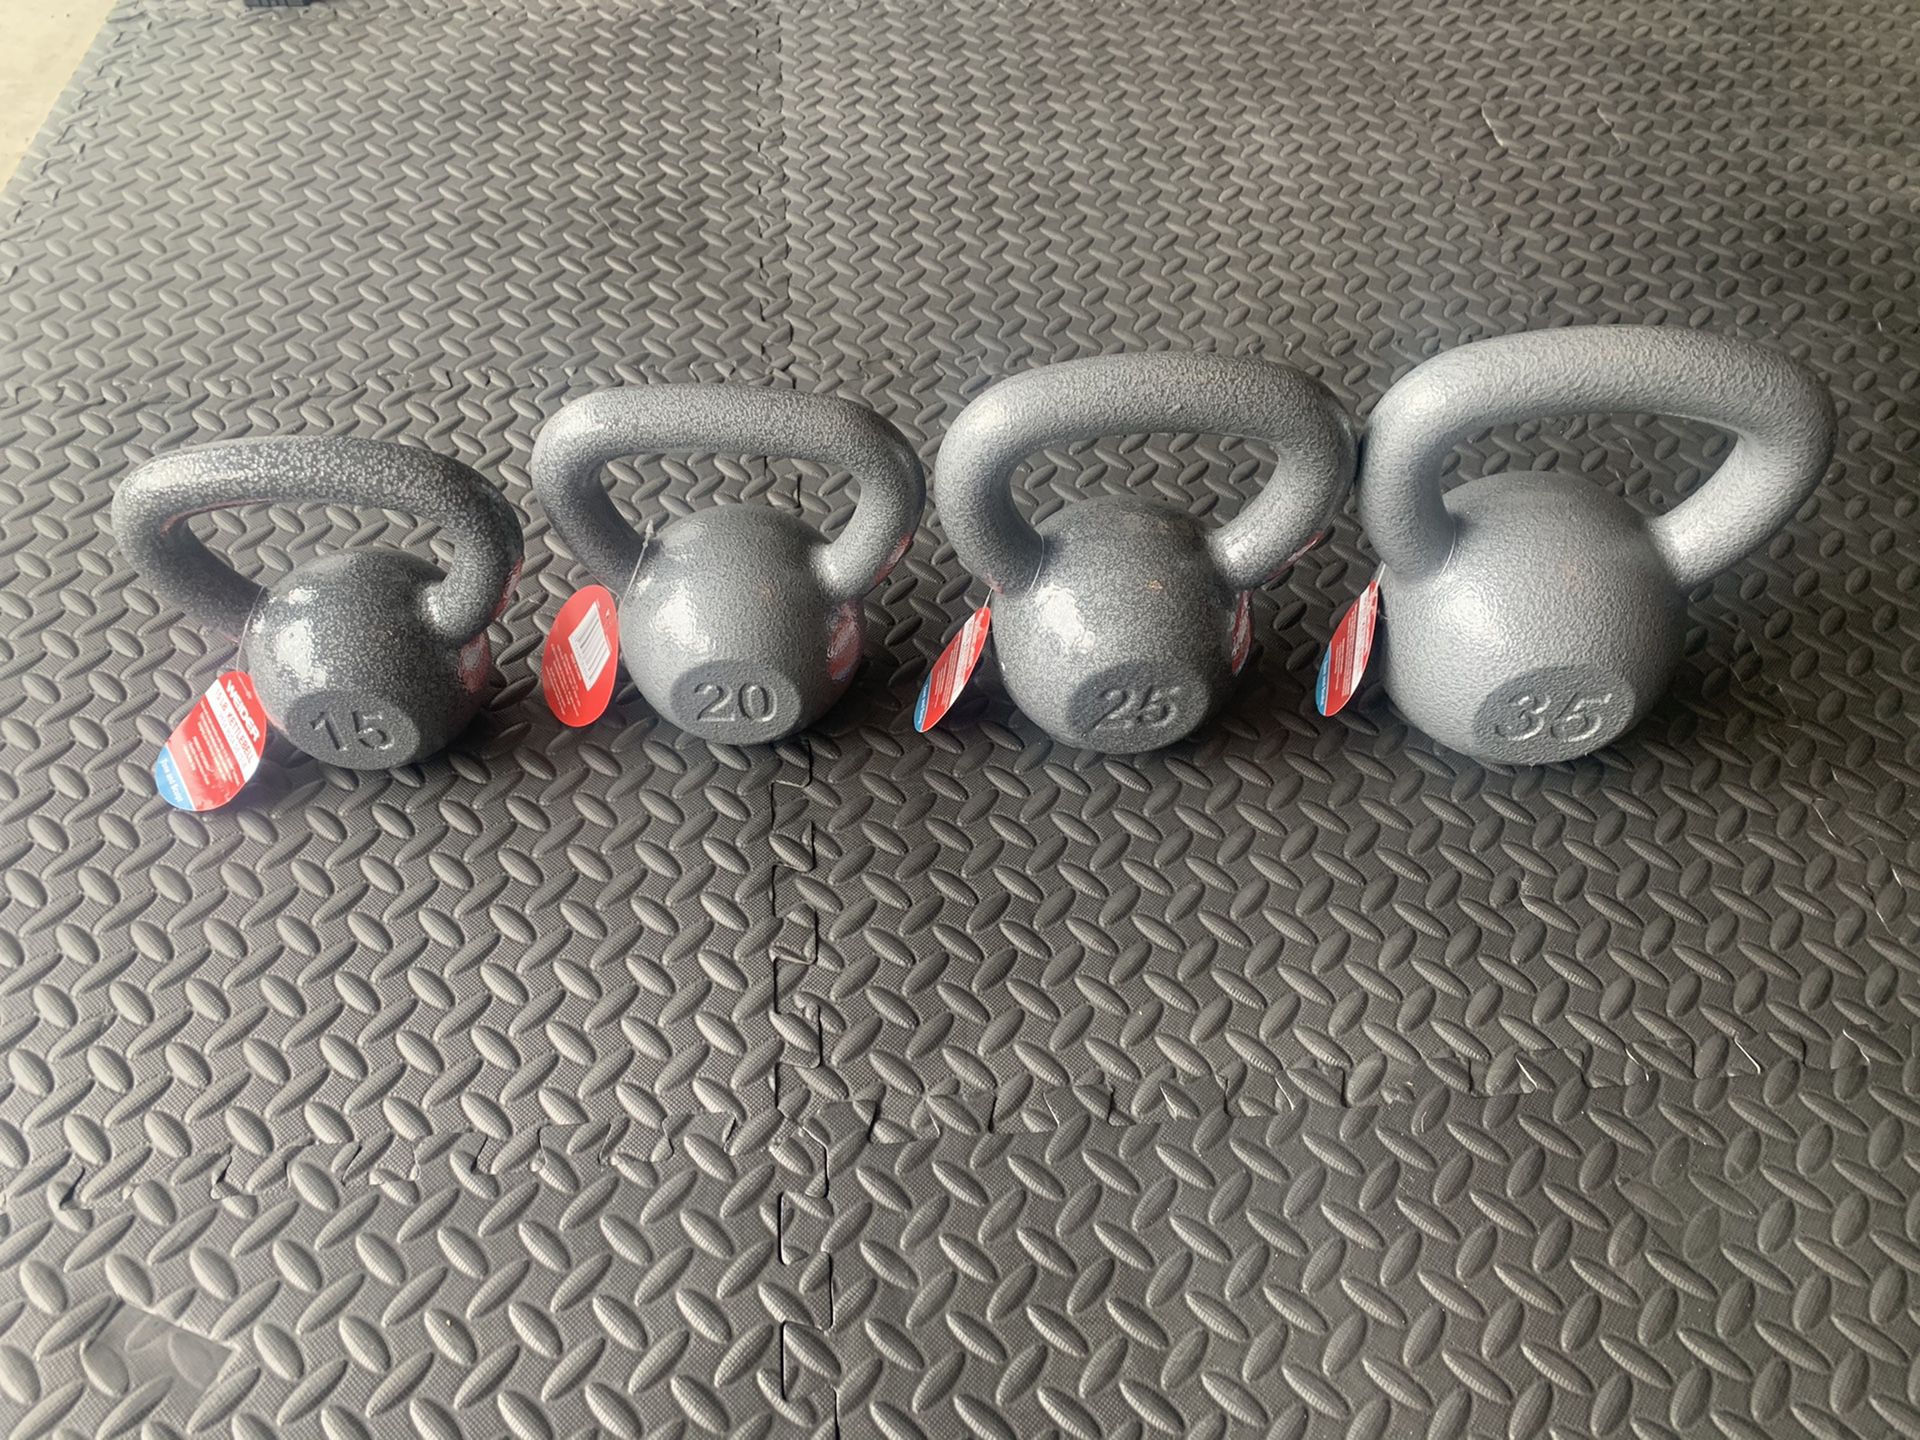 Kettlebell Weights *Sold Individually*